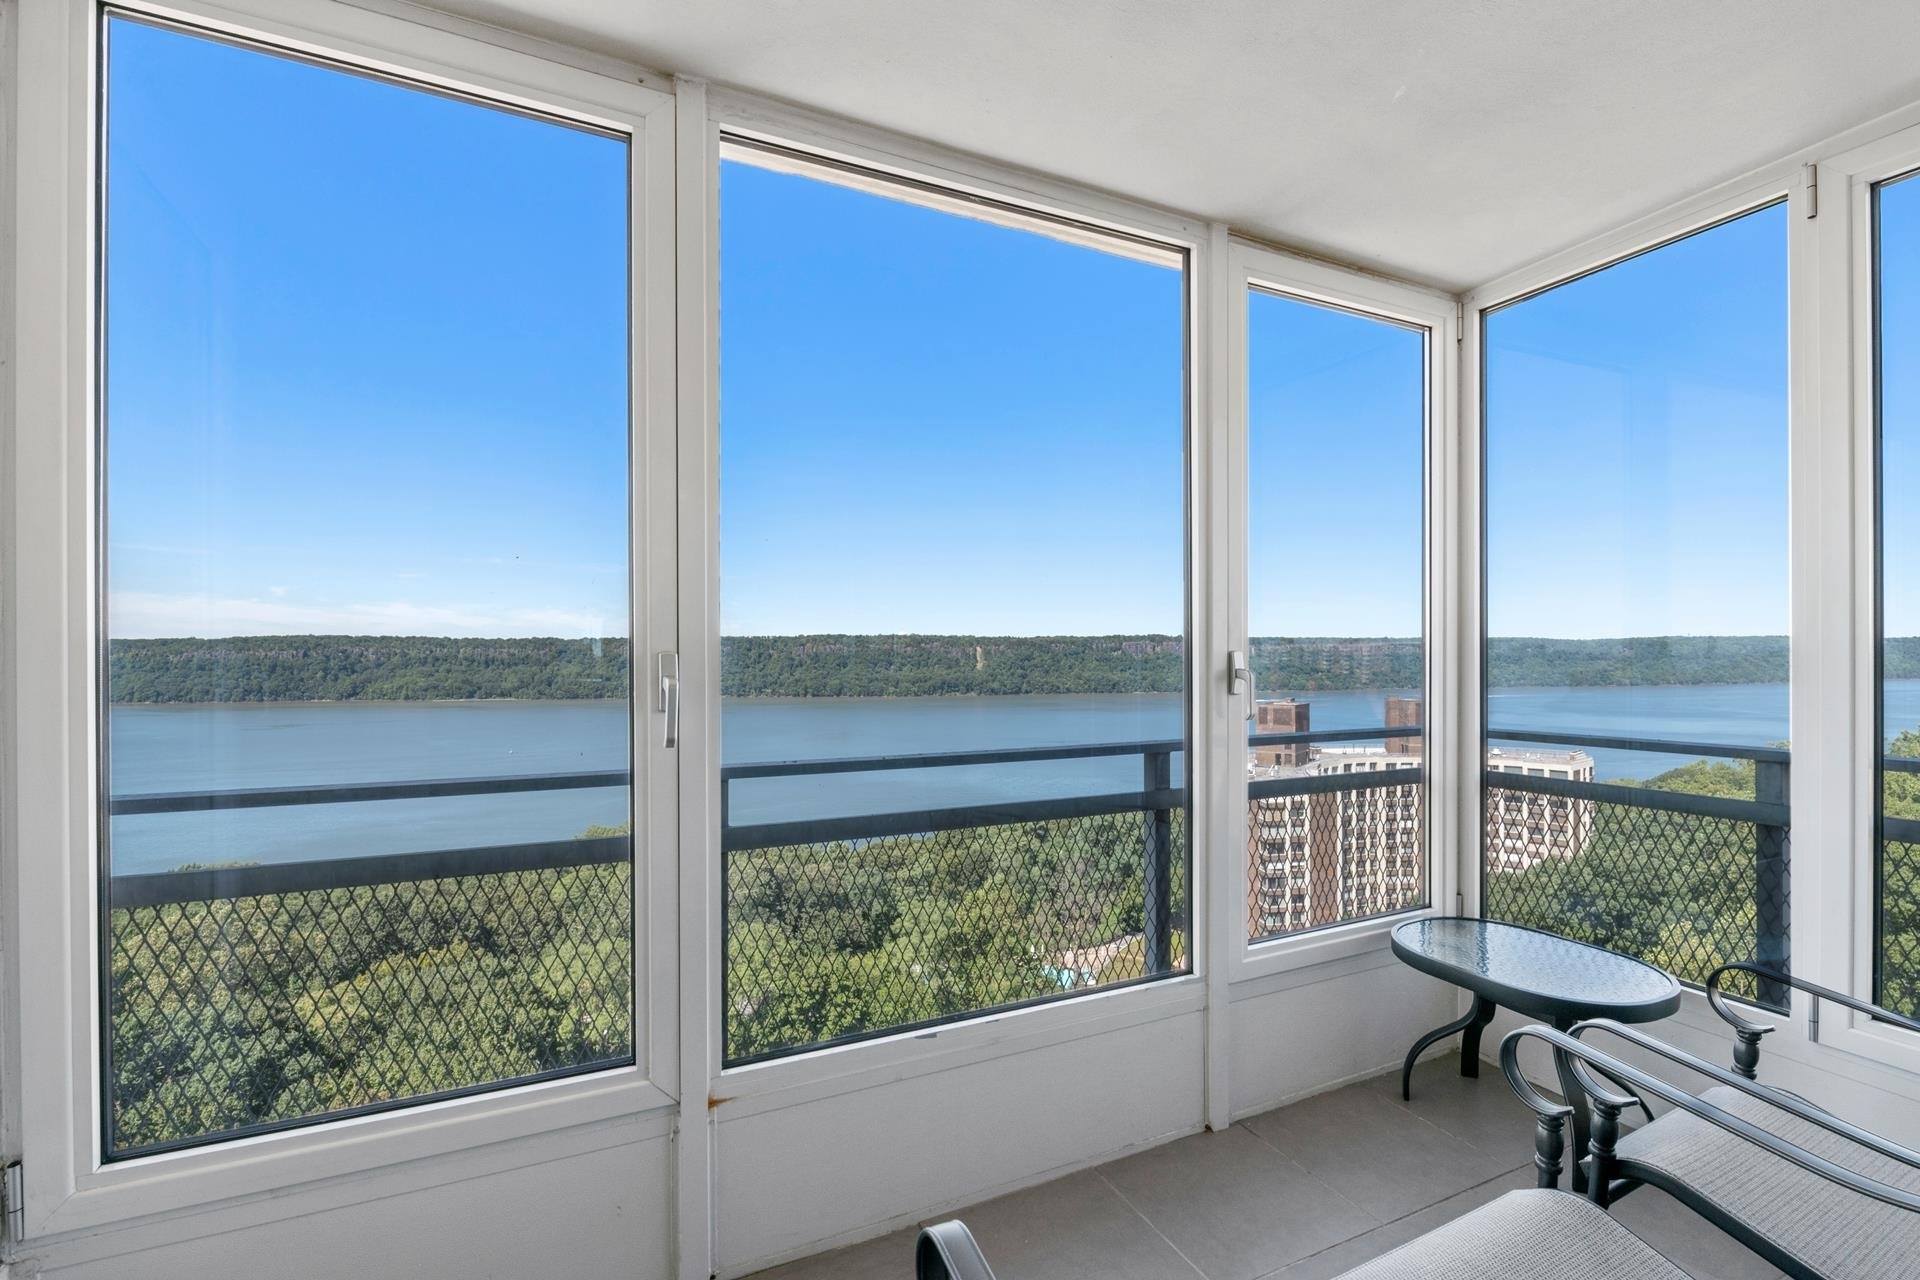 Co-op Properties for Sale at Manor Towers, 3671 HUDSON MANOR TER, 15CD Riverdale, Bronx, NY 10463